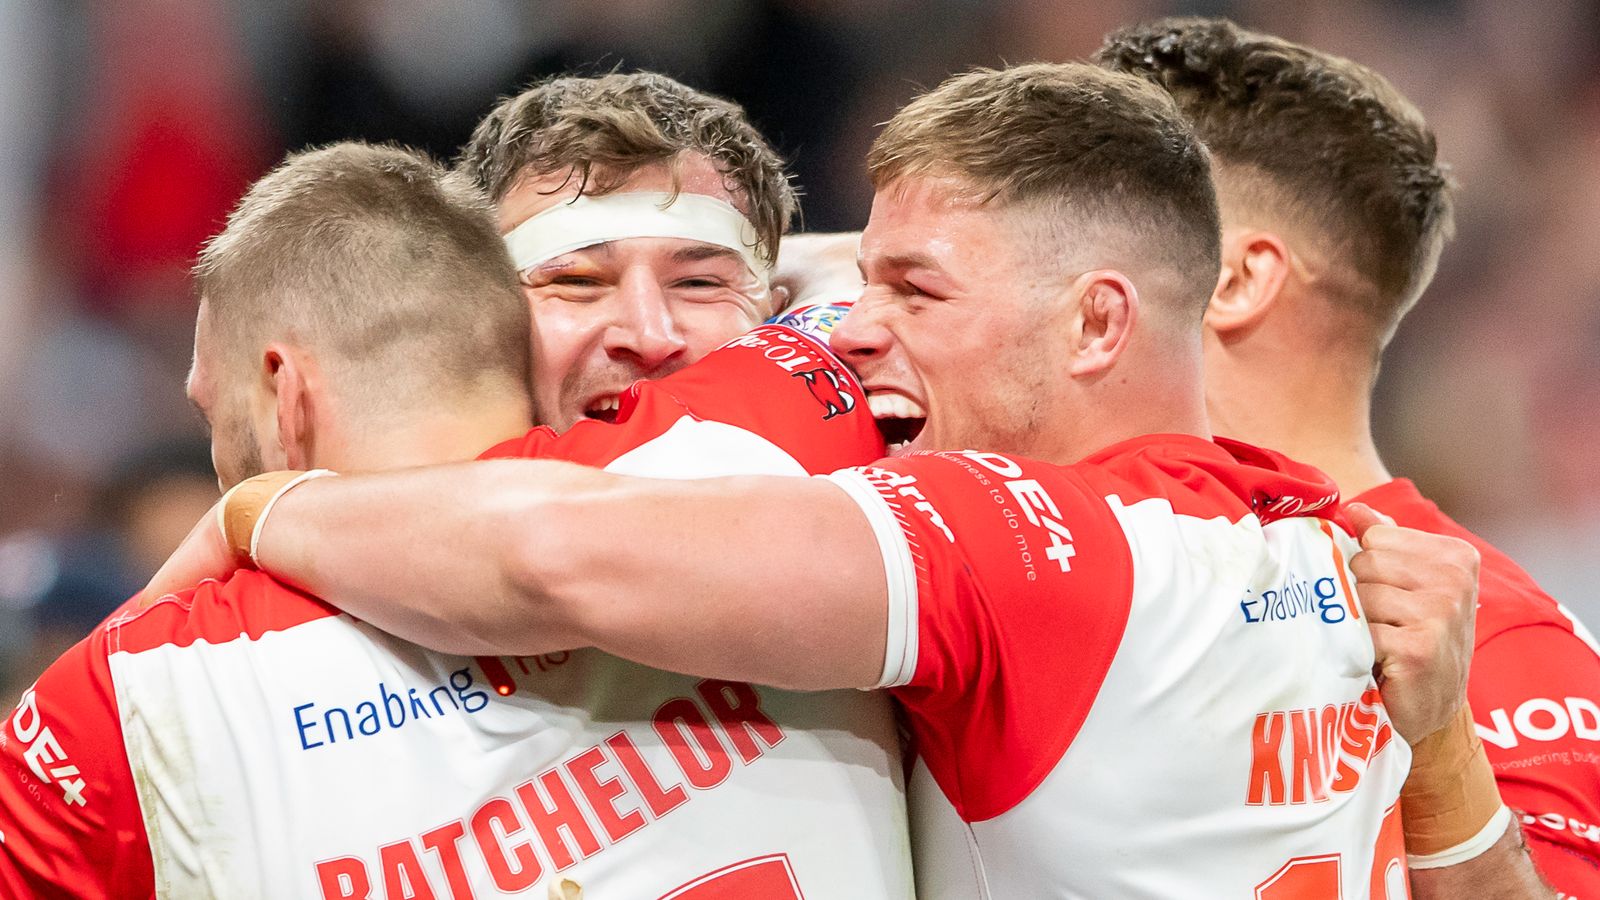 Super League Grand Final: St Helens make history with 24-12 victory over Leeds Rhinos at Old Trafford